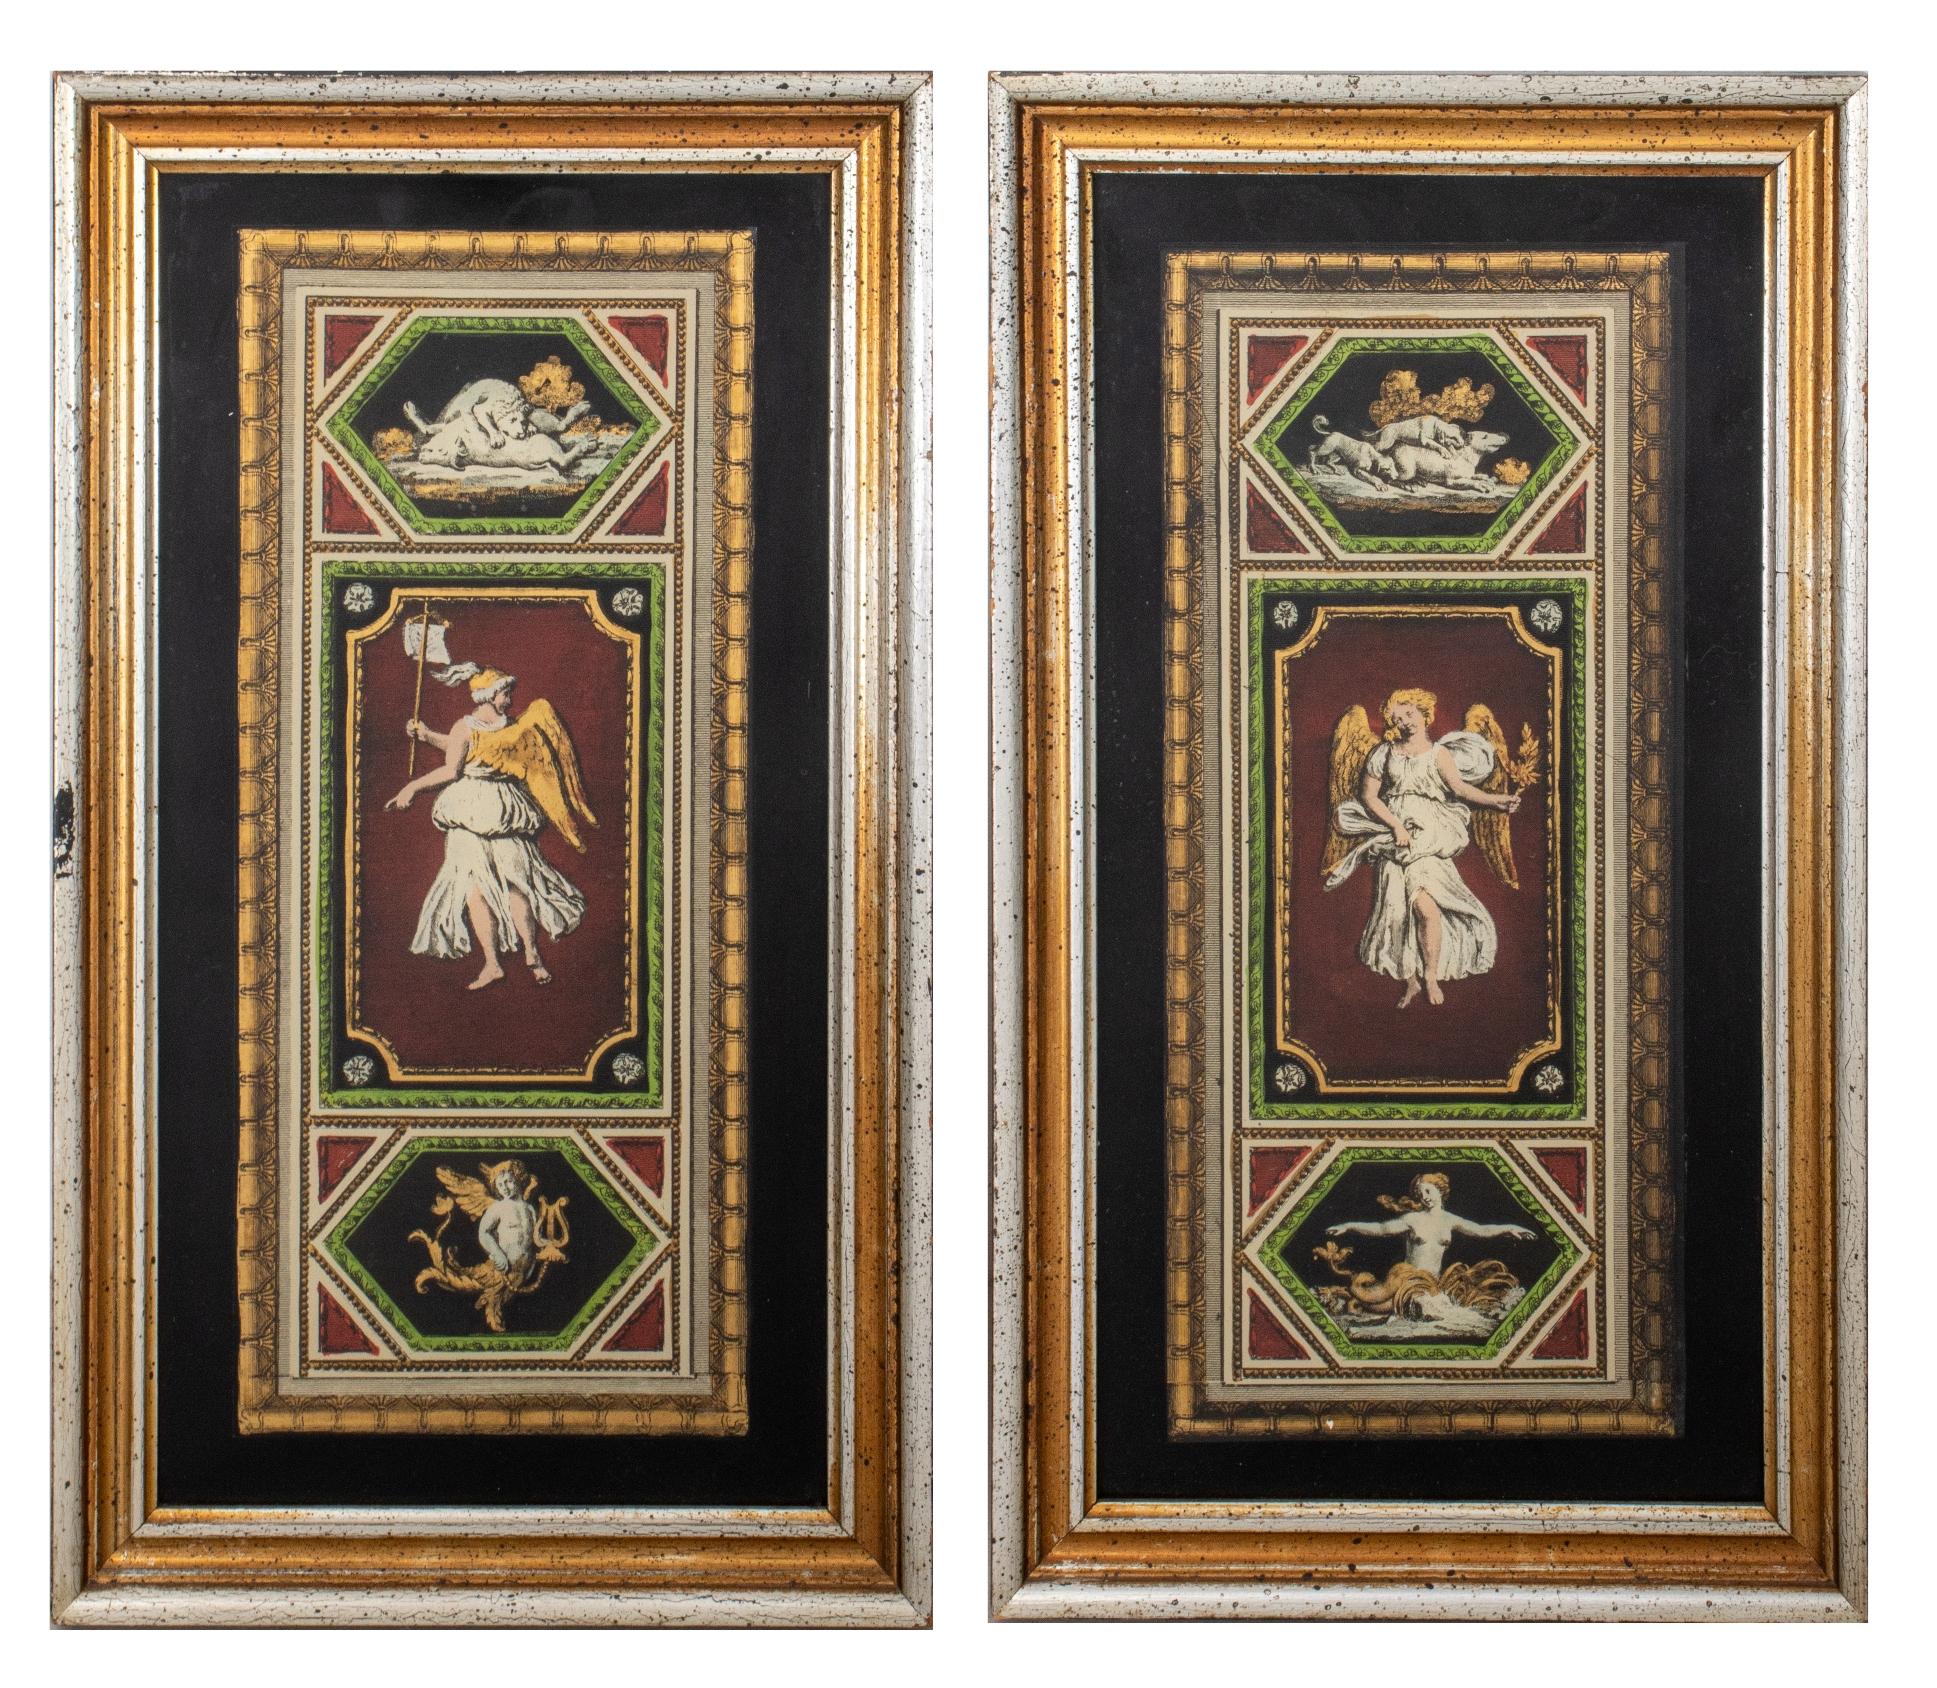 Two Italian Verre eglomise style mounted framed prints, each  with hand colored and gilded prints mounted against a black reverse-painted glass panel, now housed in antiqued gold and silver frames.

Dimensions: 15